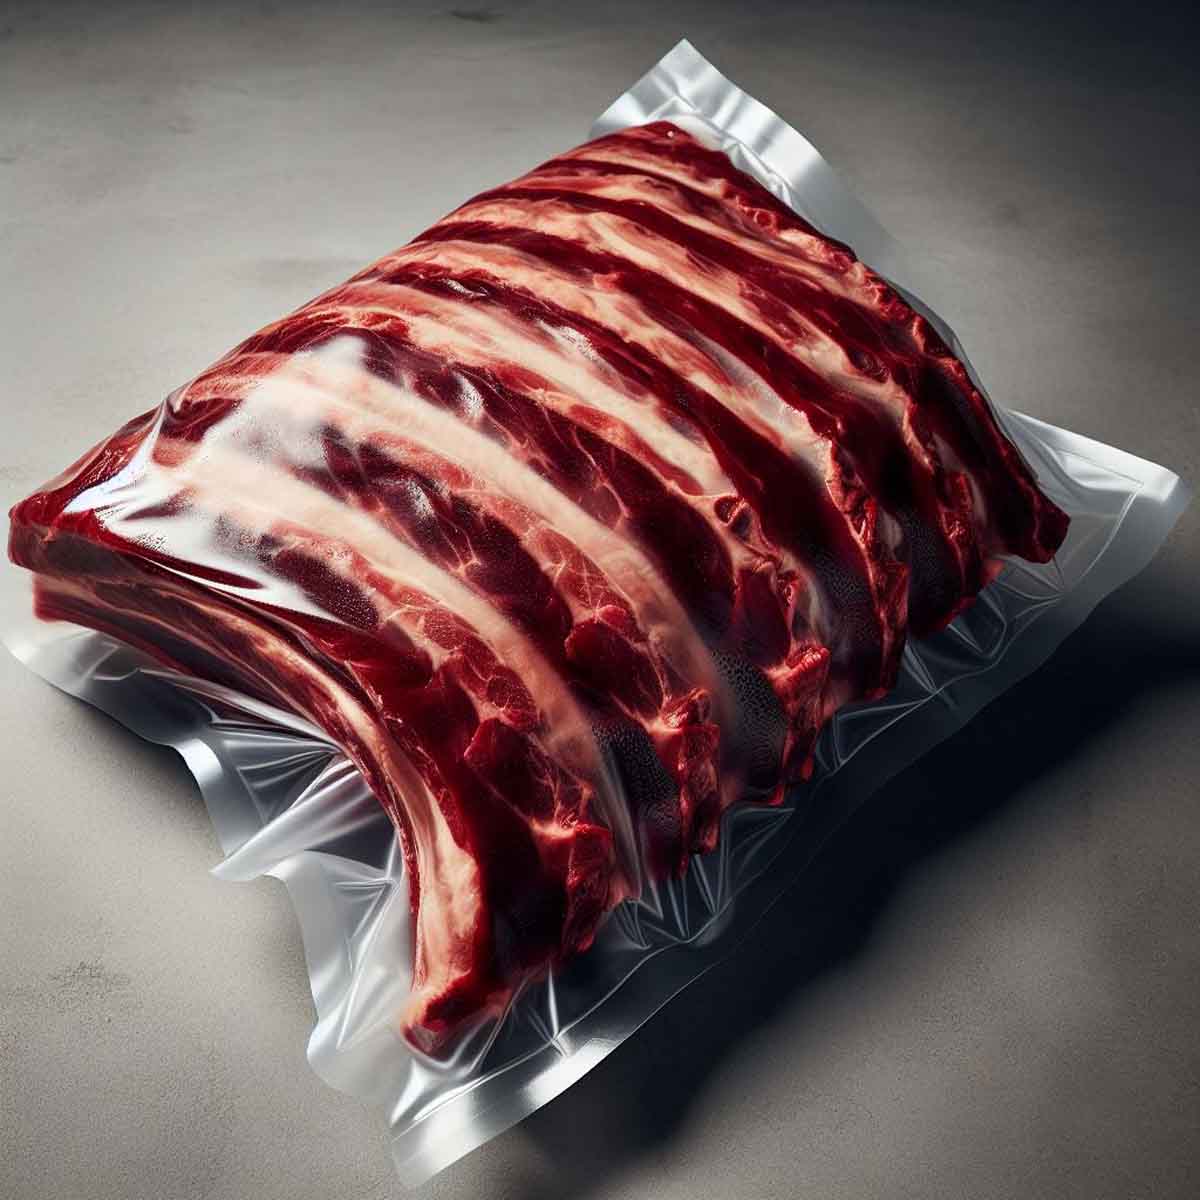 Beef ribs vacuum-sealed in a clear plastic bag, showing large size, deep red color, and rich marbling.